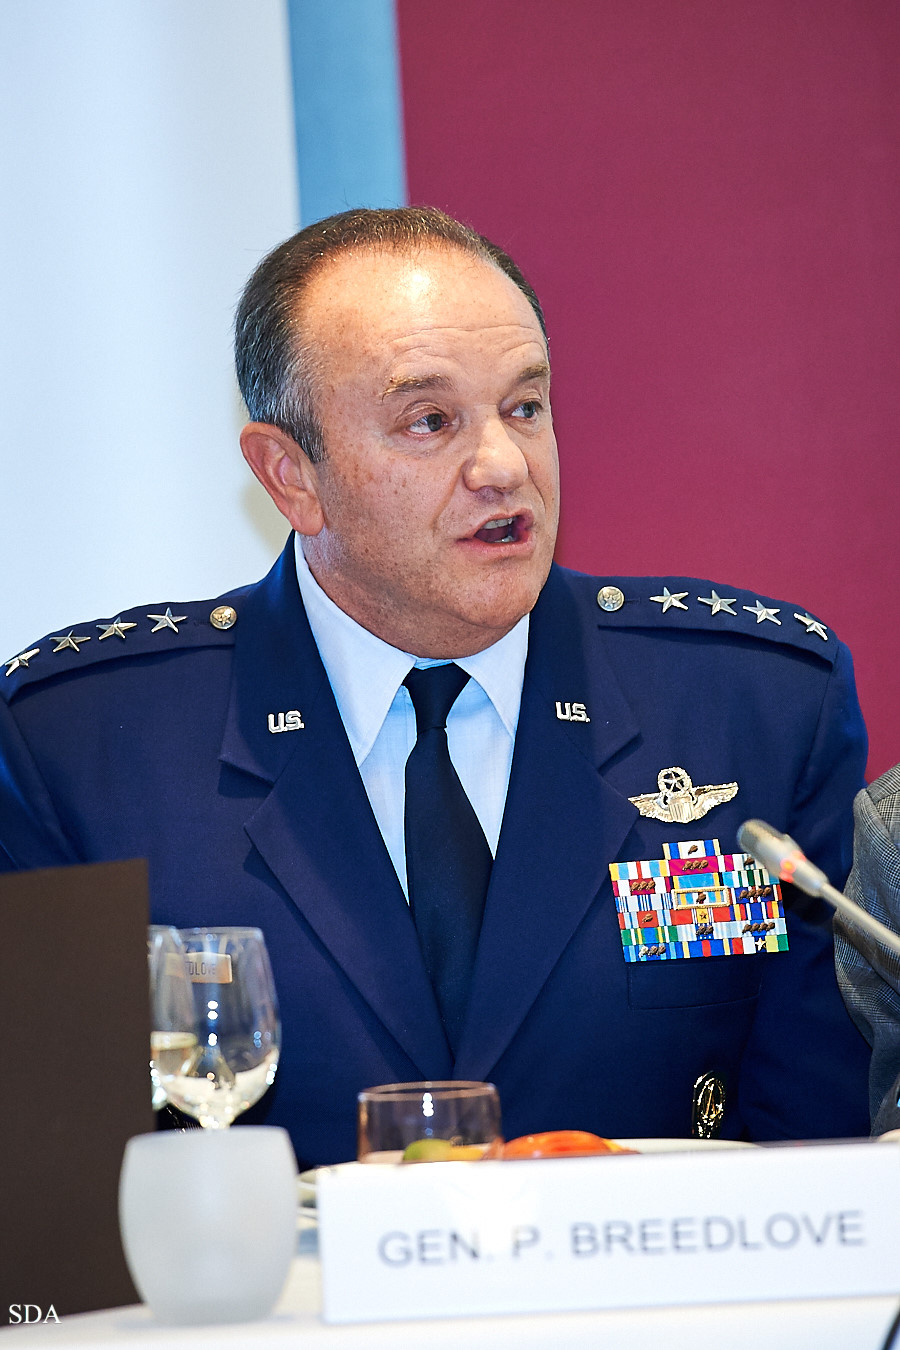 a man wearing military attire speaking into a microphone